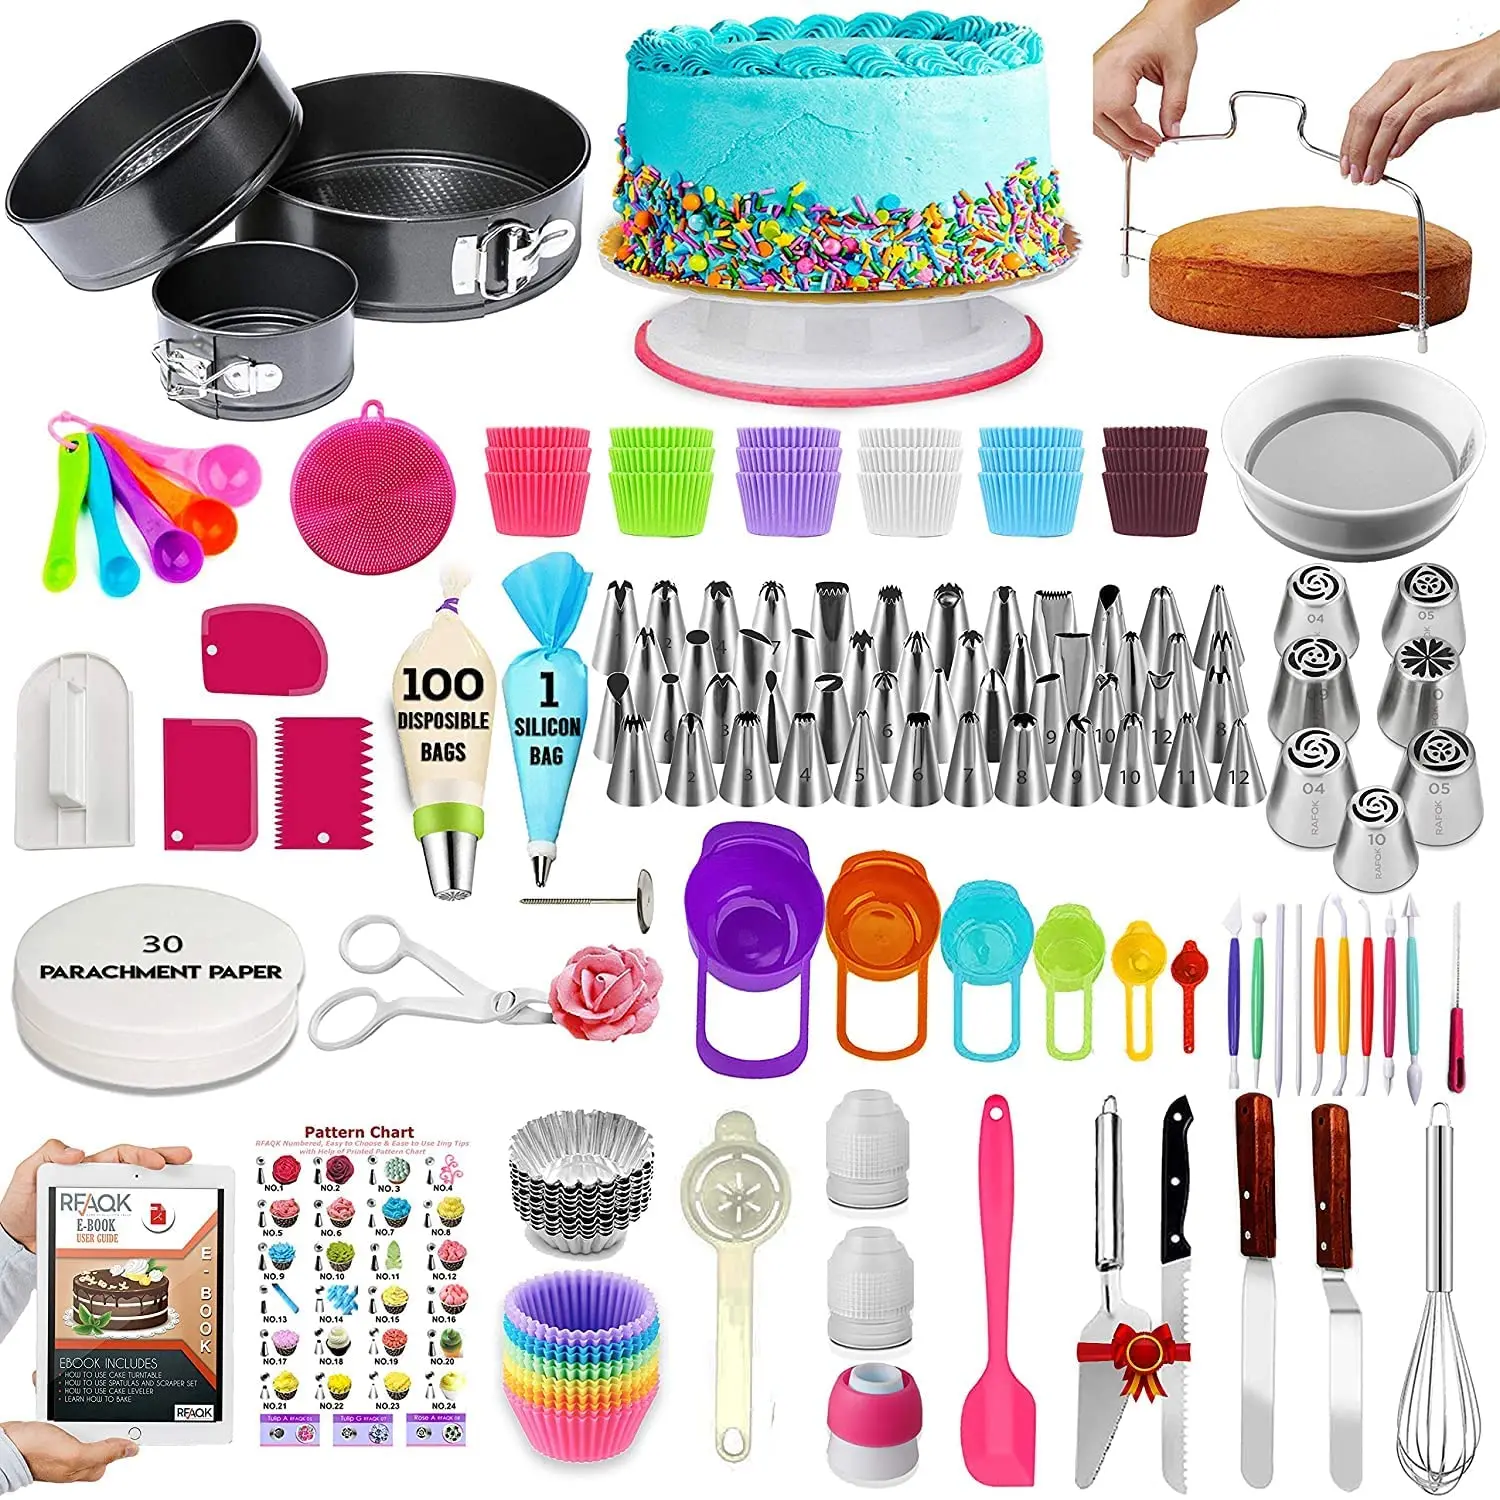 One Stop Premium Quality Baking Tools Icing Piping Bakeware Glass Dish Cake Decorating Supplies and Accessories